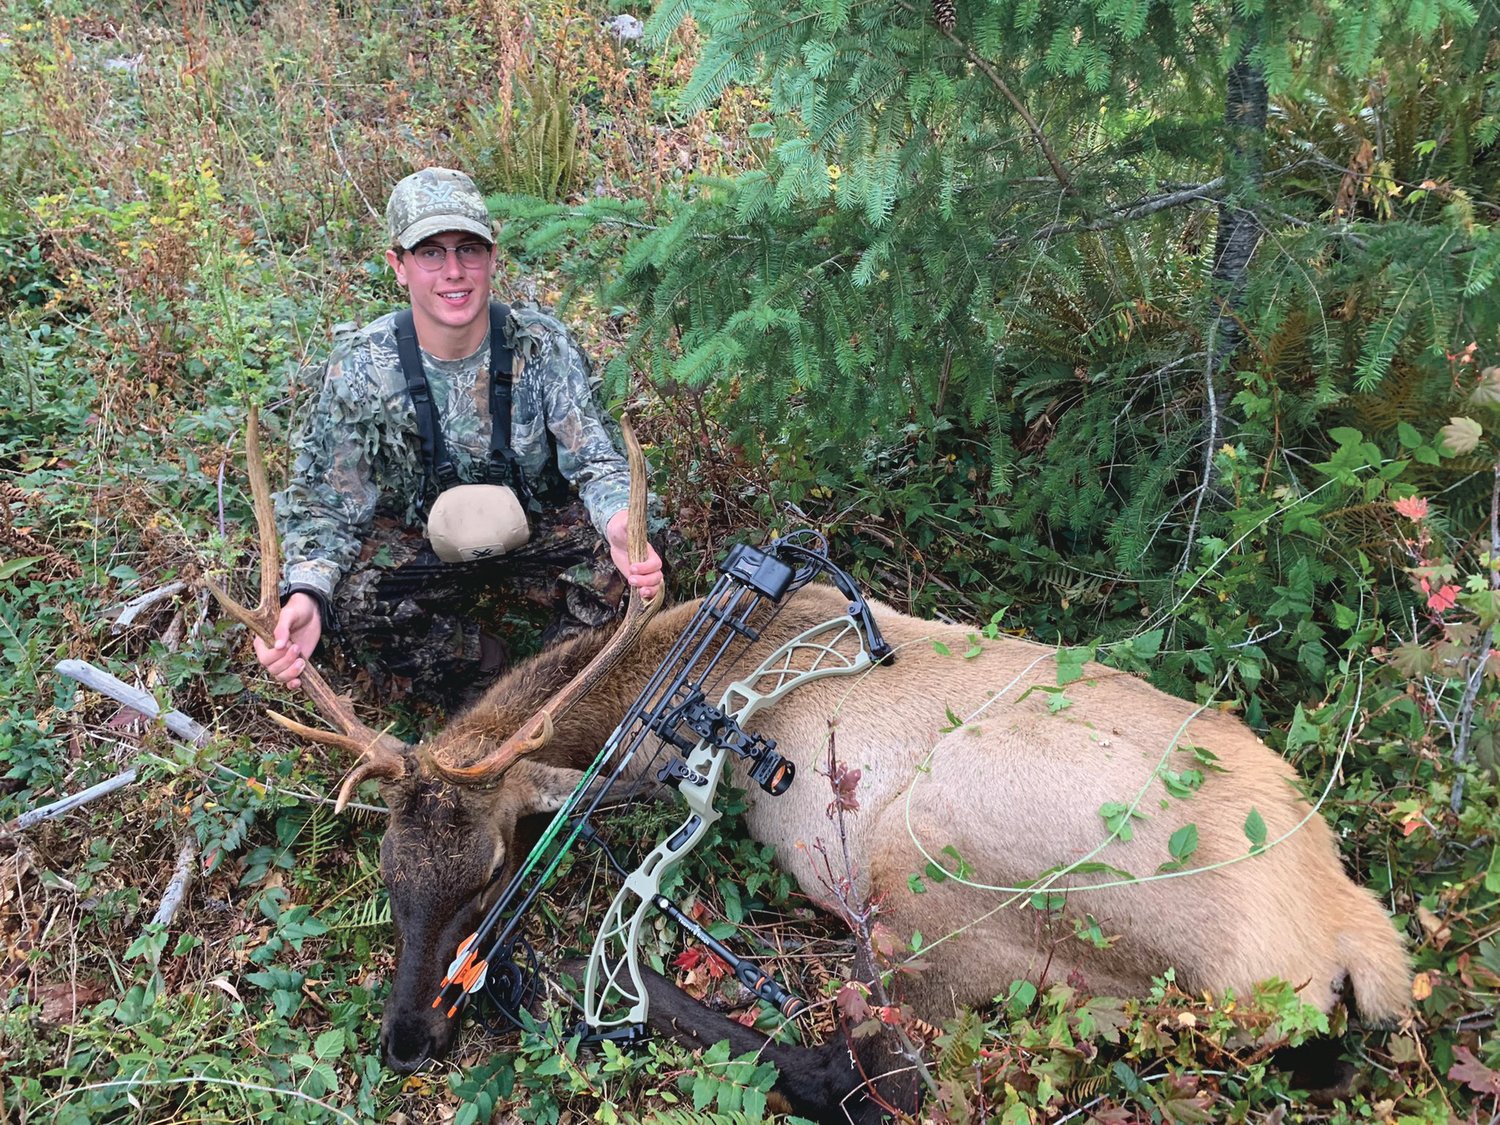 Tumwater High School student Luke Brewer with the elk he harvested near Pe Ell on opening day of archery season Sept. 11, 2021.